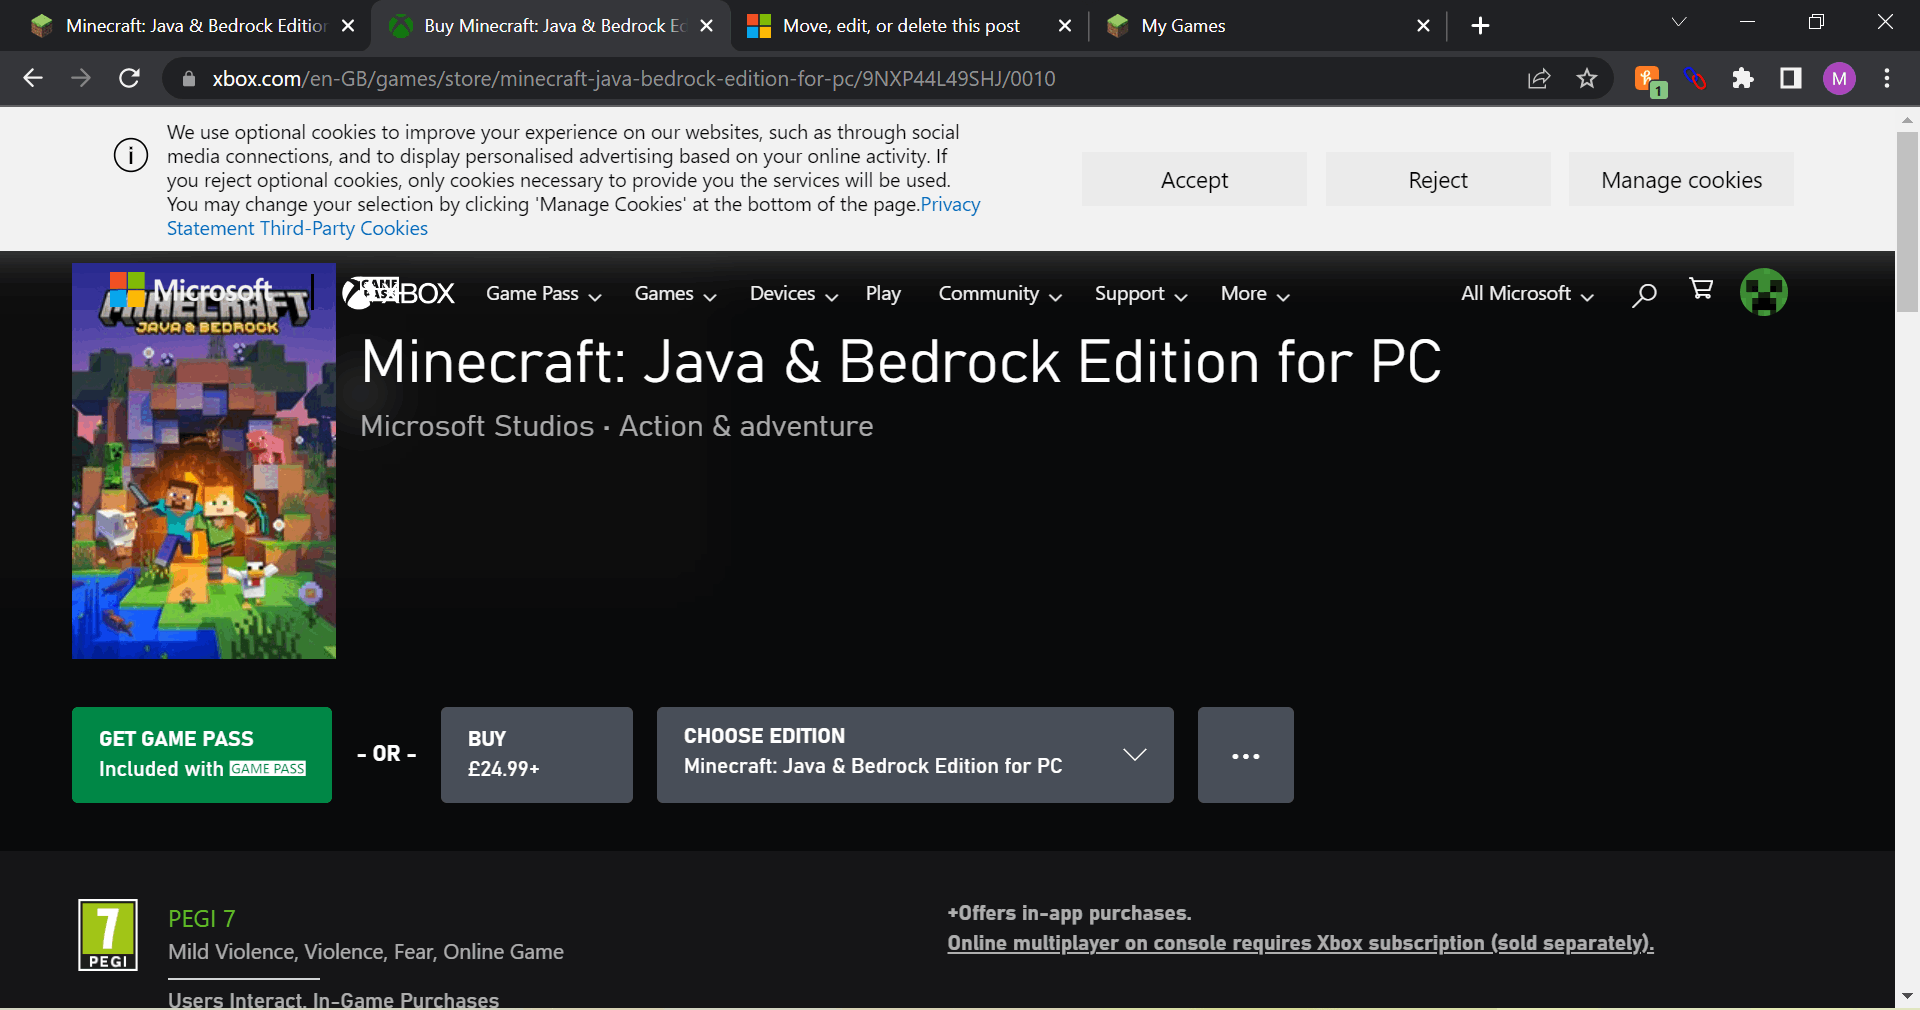 Wait what? Because you own java you'll get bedrock as a bonus